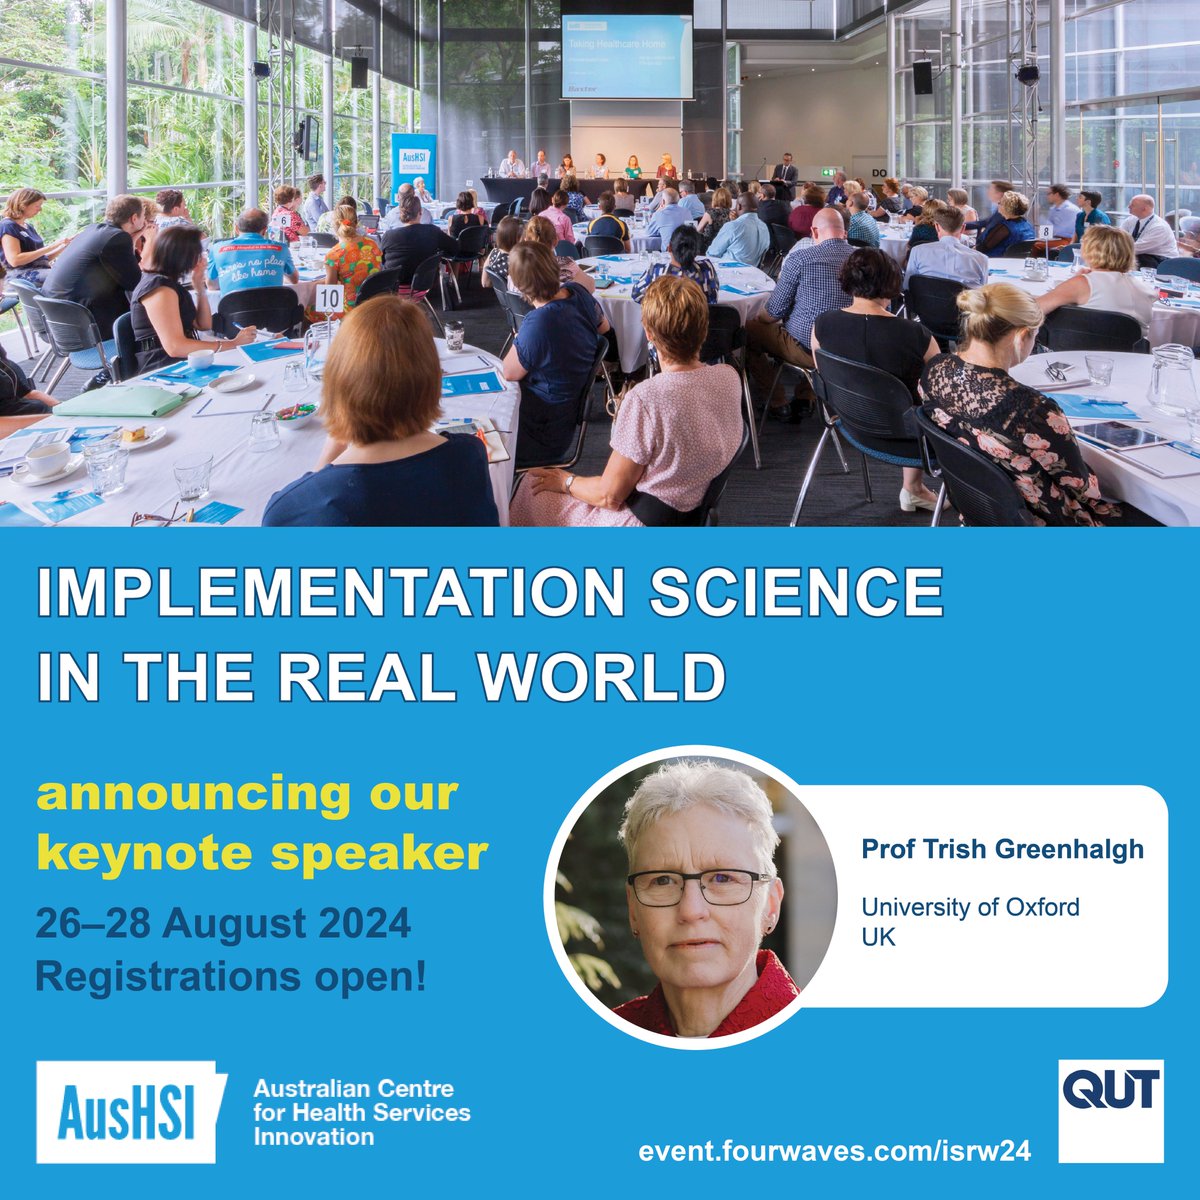 📢We are thrilled to announce that @trishgreenhalgh, Professor of Primary Health Care @UniofOxford, will be a keynote speaker for #ISRW24! Join us to hear from the creator of the widely adopted #NASSS #implementation framework. 🎟️Register: bit.ly/isrw24 @CHT_QUT #impsci